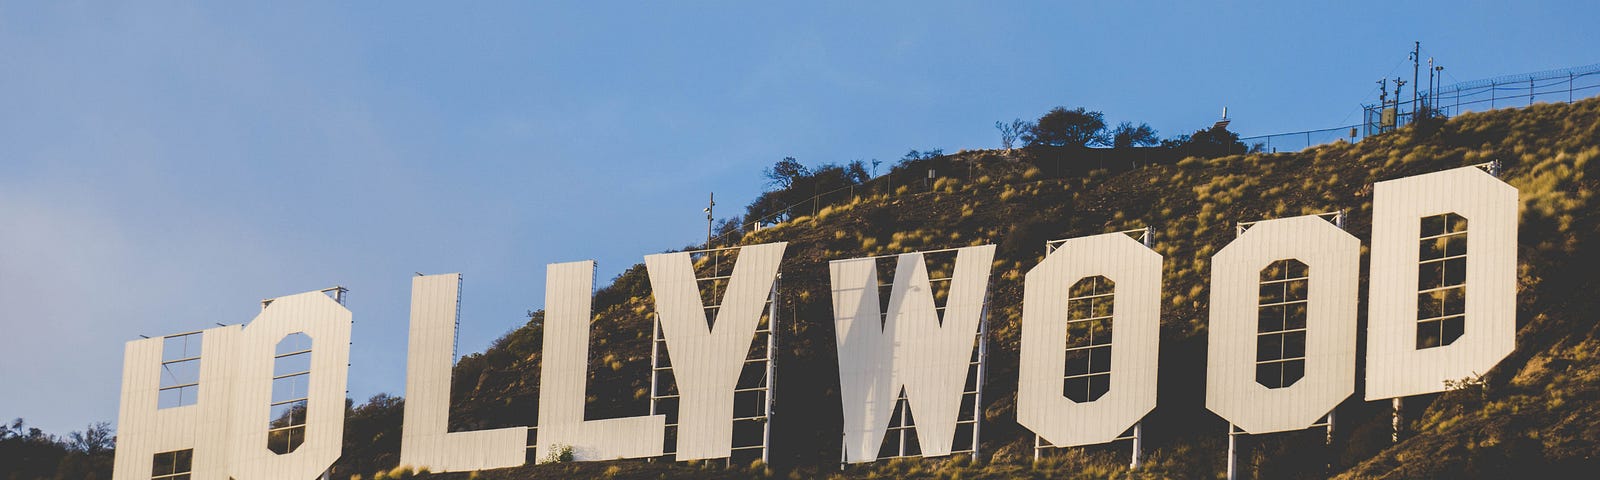 Coloured image showing the famous Hollywood sign nestled in the hills under a bright blue sky.